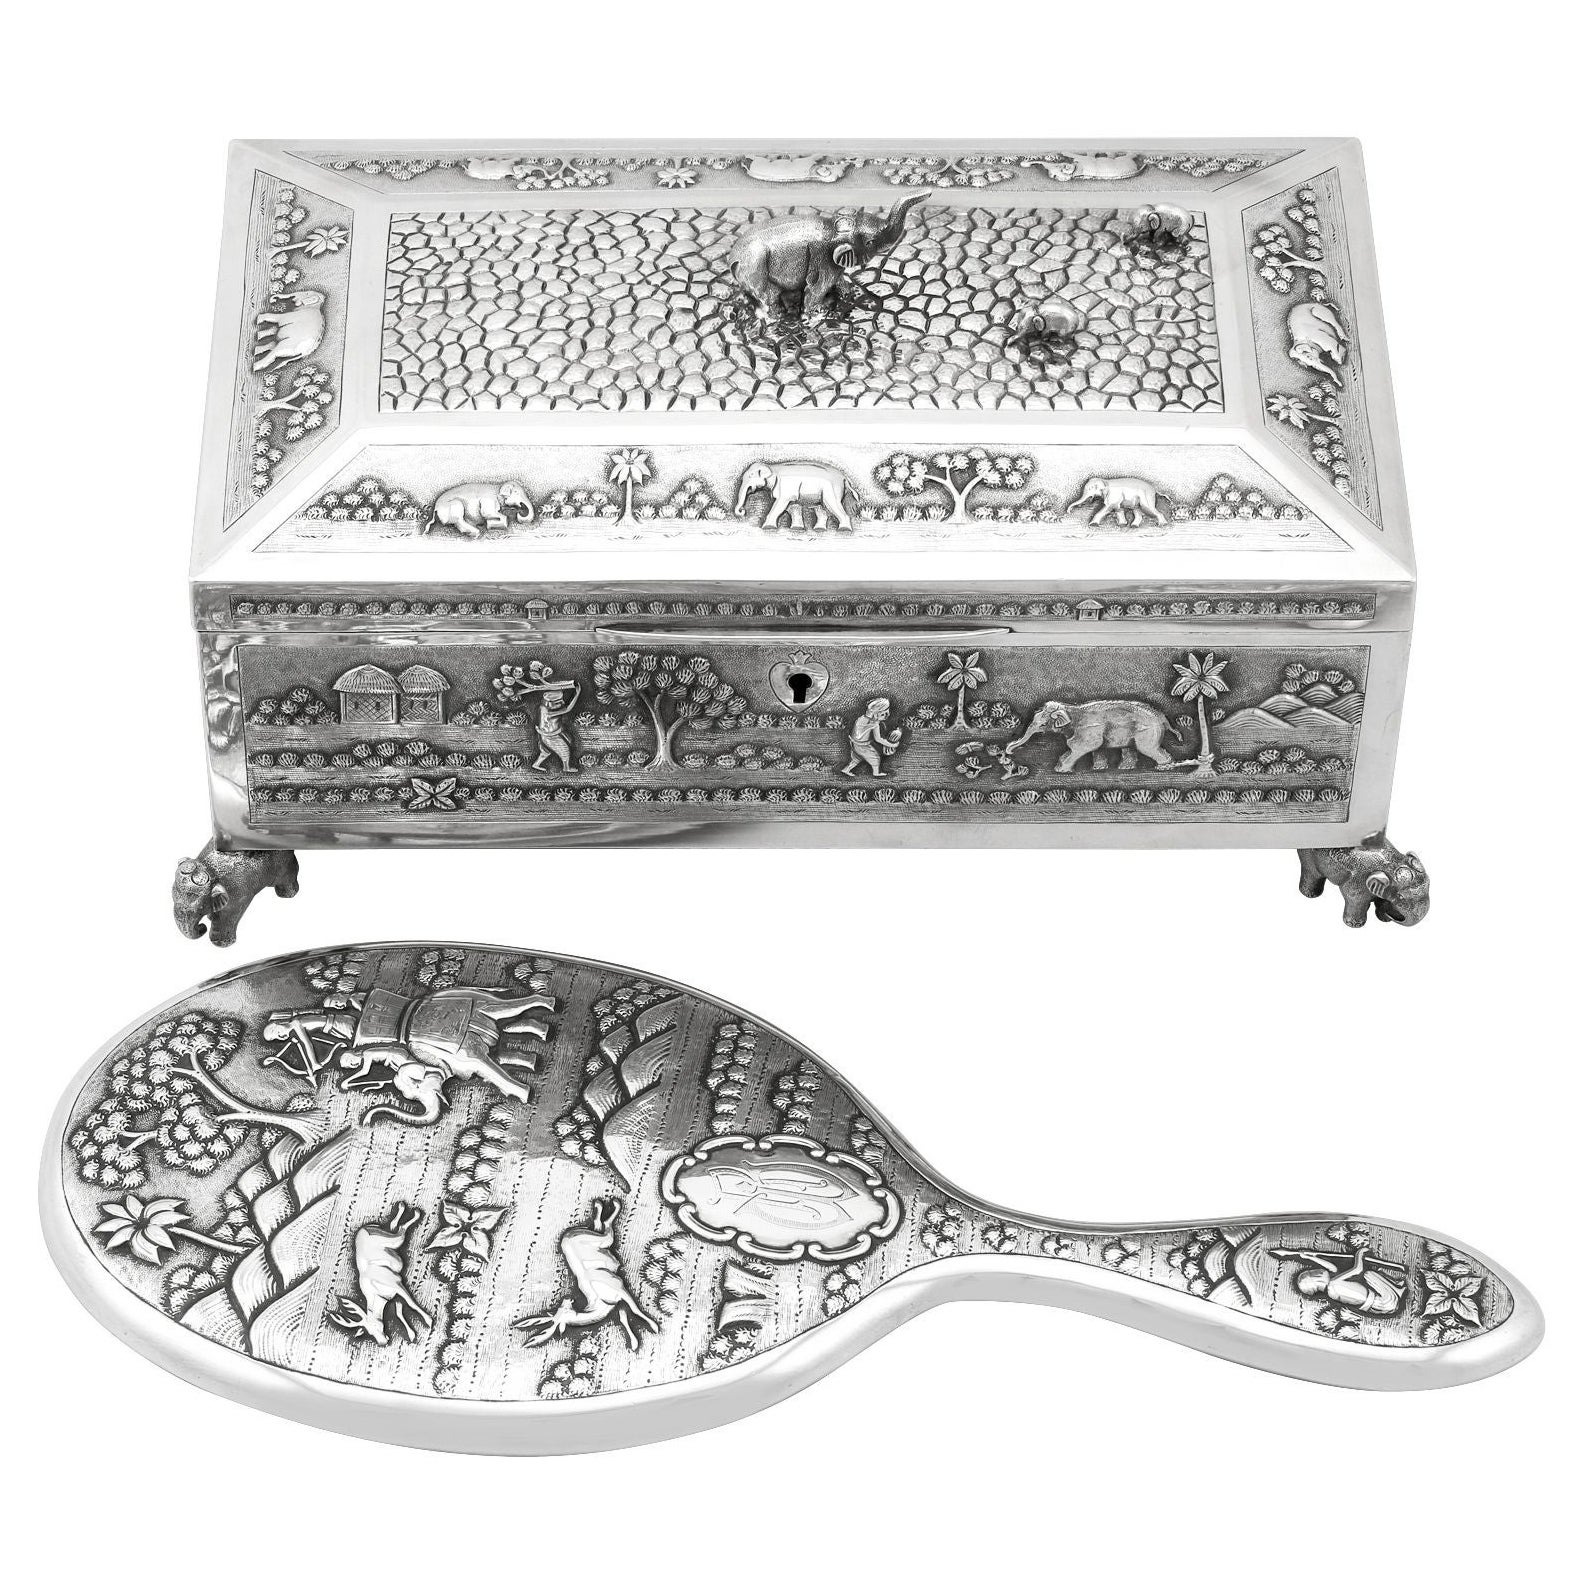 Antique Indian Silver Jewelry Casket and Hand Mirror, Circa 1890